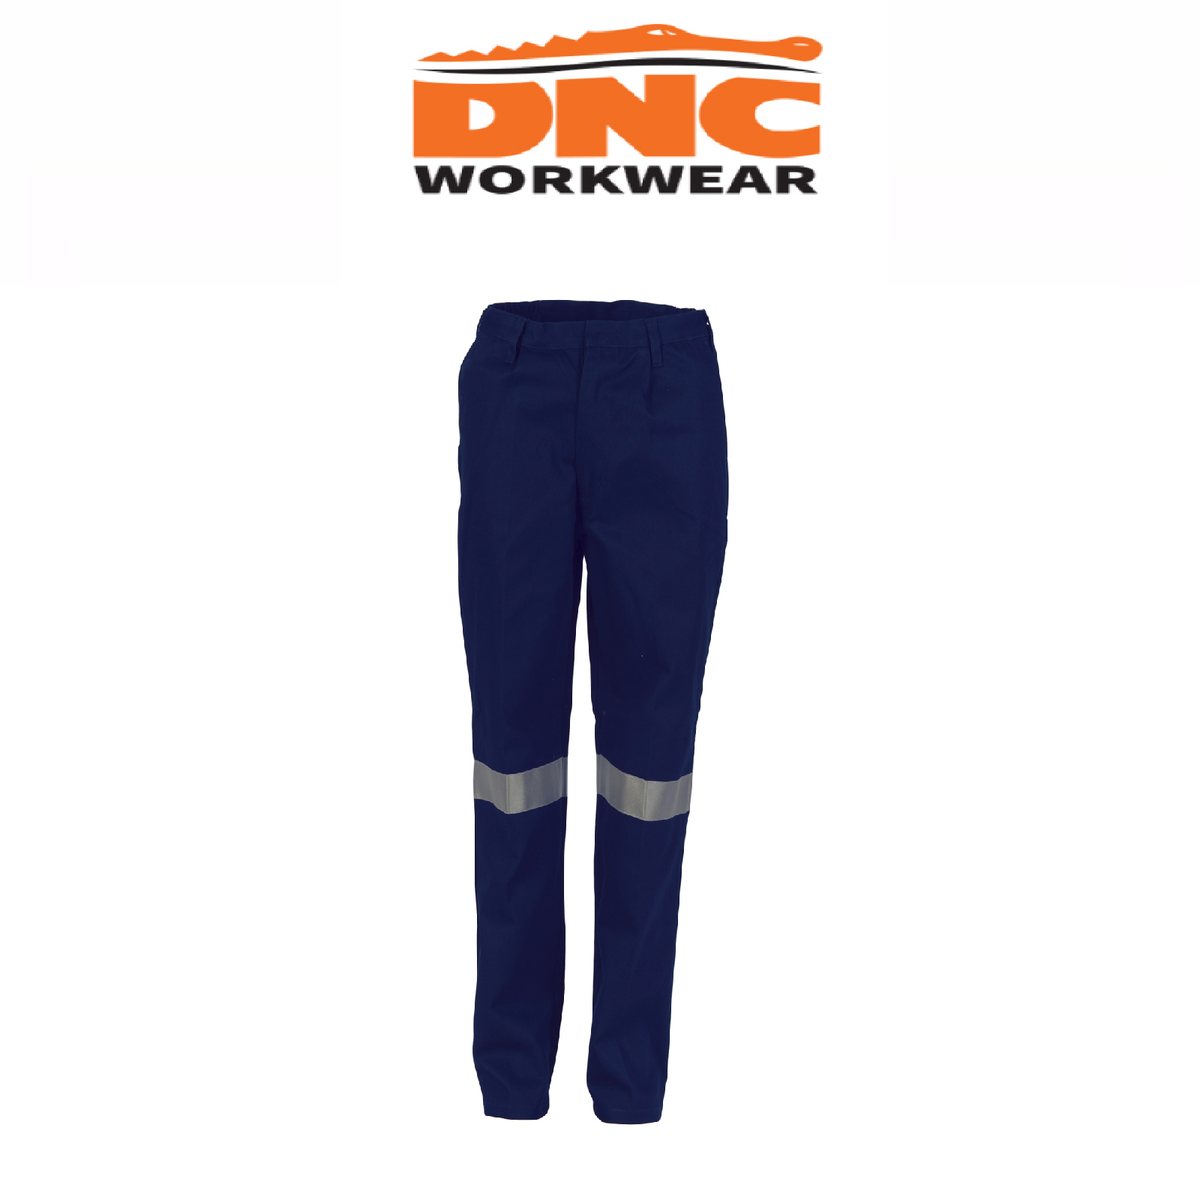 DNC Workwear Ladies Cotton Drill Pants 3M Reflective Tough Work Casual 3328